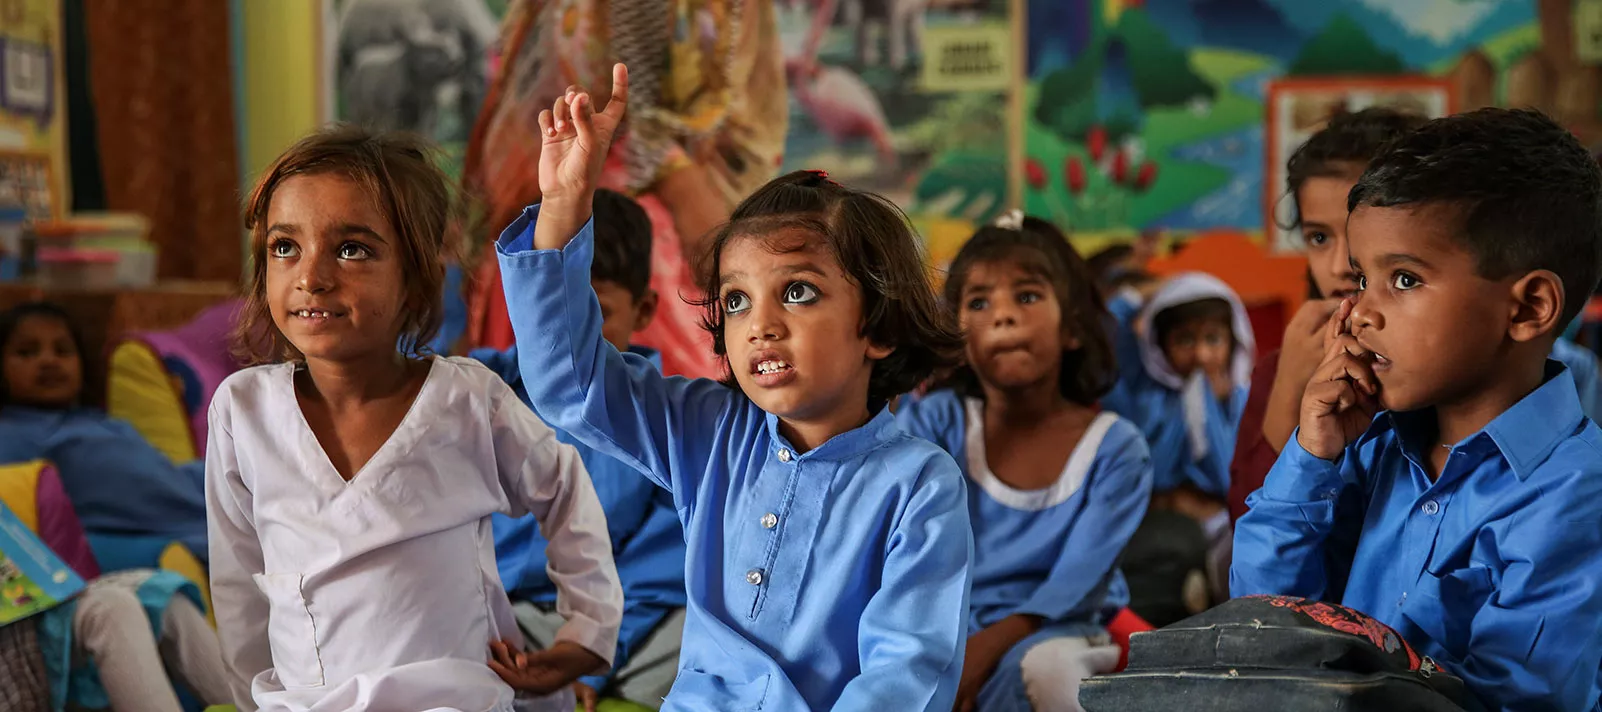  Five-year-old Minahil Muzaffar raises her hand in an Early Childhood (ECE) class in an elementary school in Toba Tek Singh district, in the Punjab province, Pakistan.